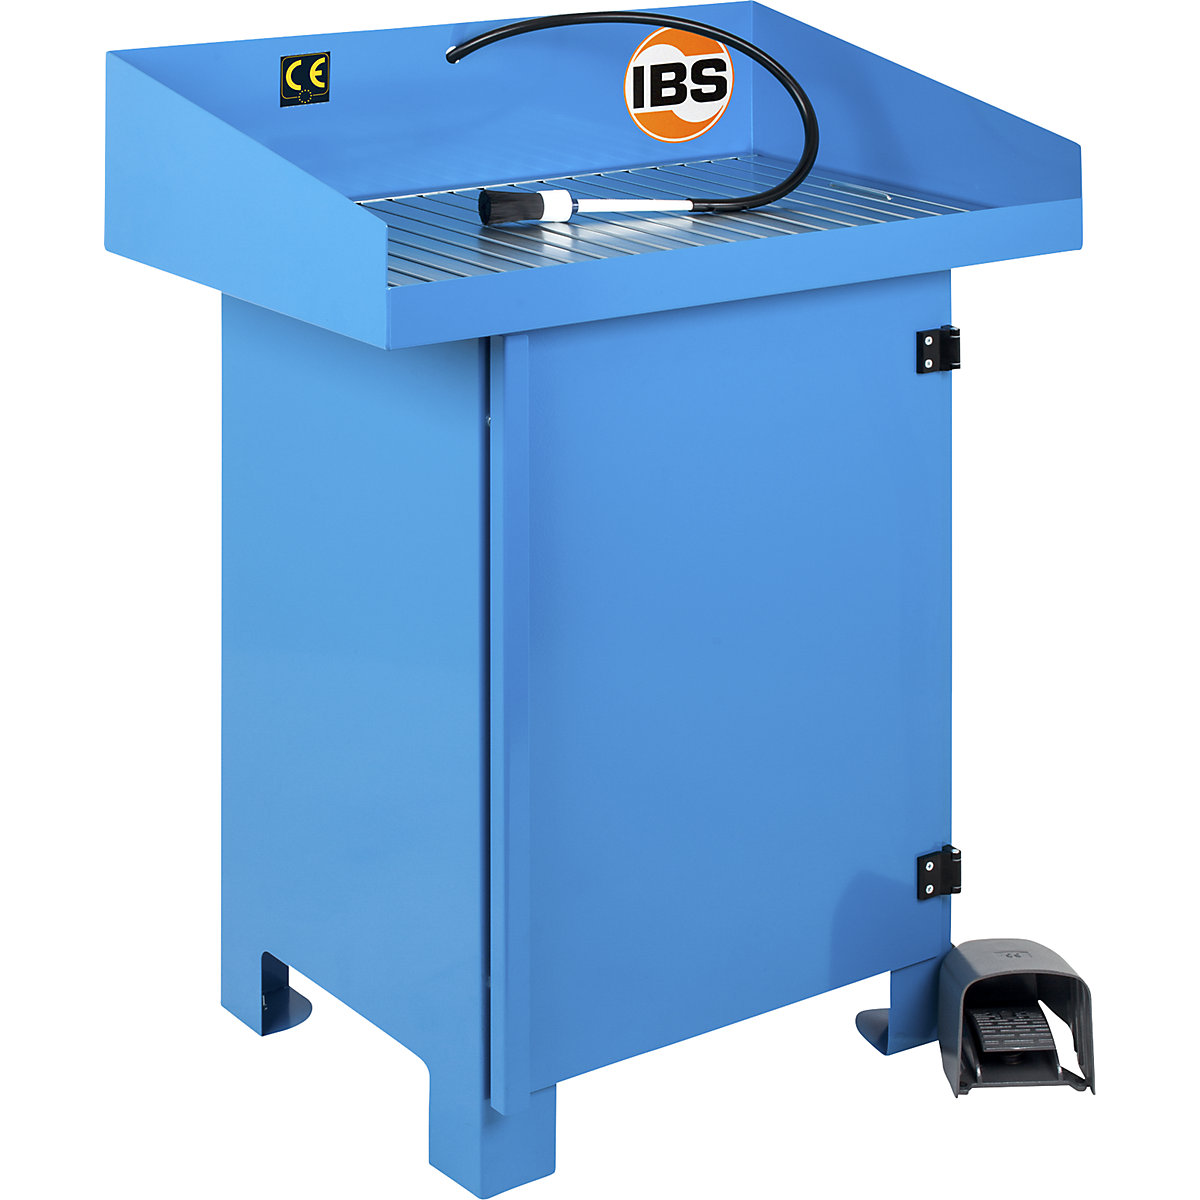 Free standing parts cleaner, closed - IBS Scherer